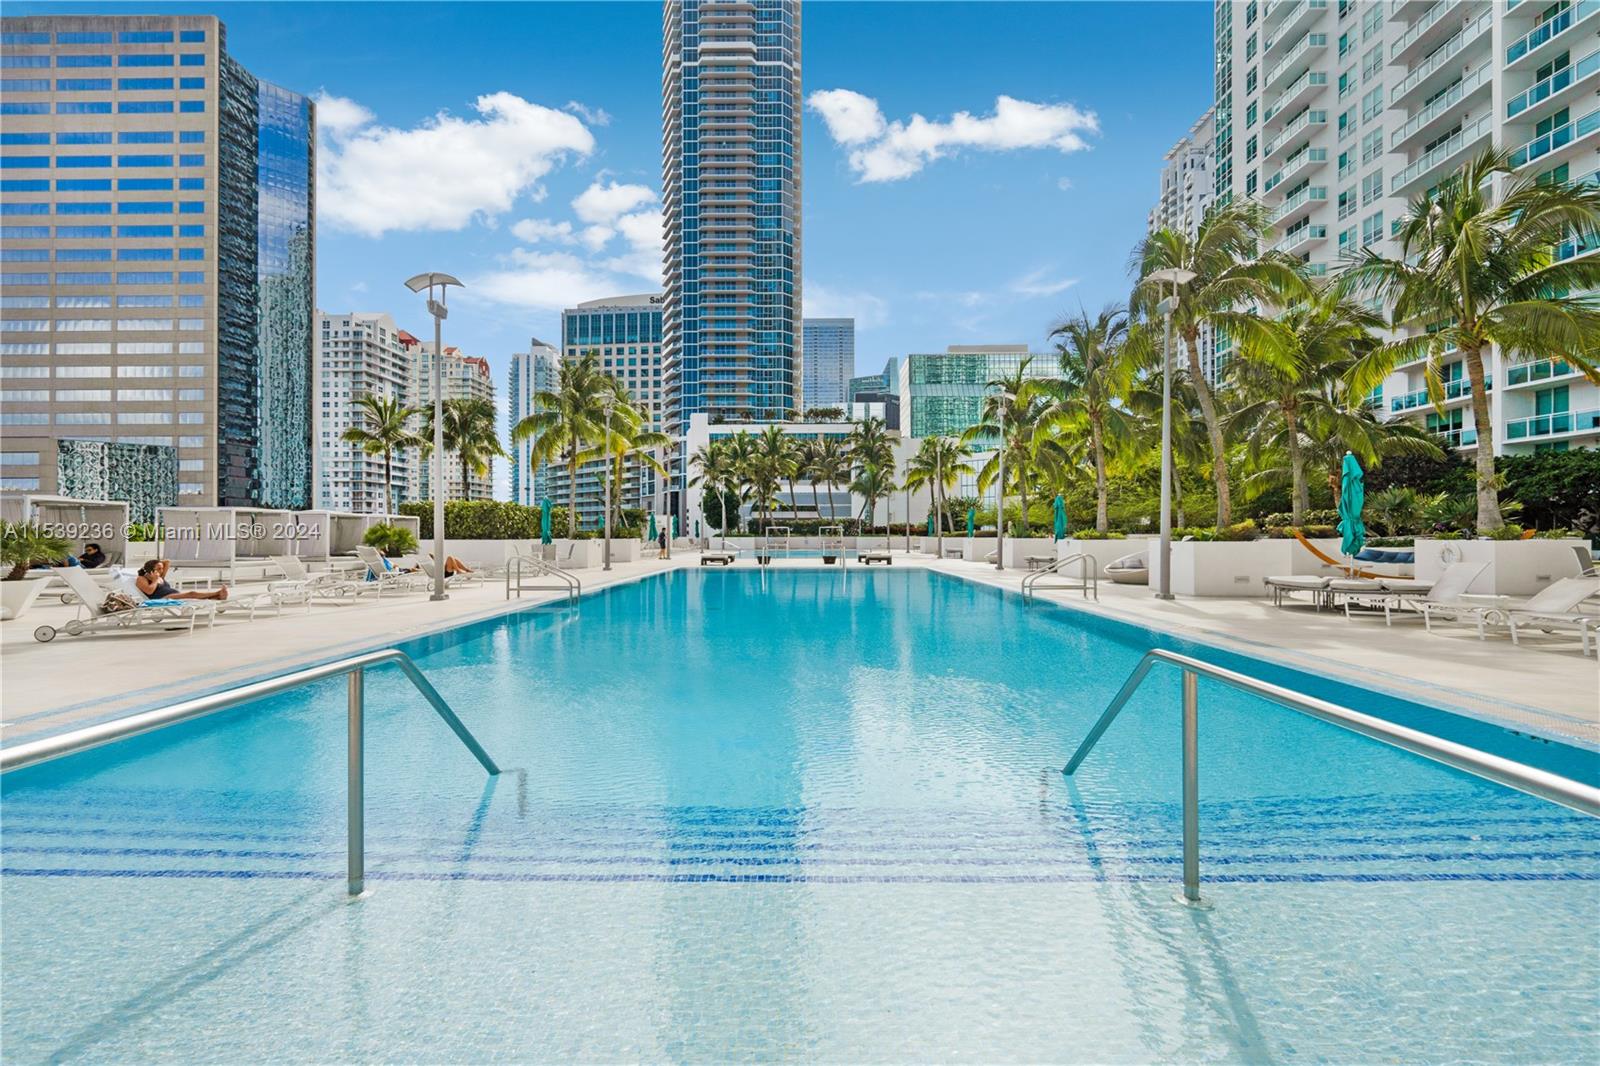 Enjoy living in this beautiful one bedroom condo at The Plaza, a high-rise tower centrally located in prime Brickell location. This 30th floor residence features breathtaking views of Brickell Key, Biscayne Bay and the downtown skyline, solid wood & tile floors, washer and dryer in the unit, fully painted. The Plaza Condo amenities include 24hr concierge, business center, movie theater, two infinity edge swimming pools, two state-of-the art fitness centers, sauna lounge rooms, and valet parking. Building is close to Brickell City Center, Brickell Key, Mary Brickell Village. Water/internet included.